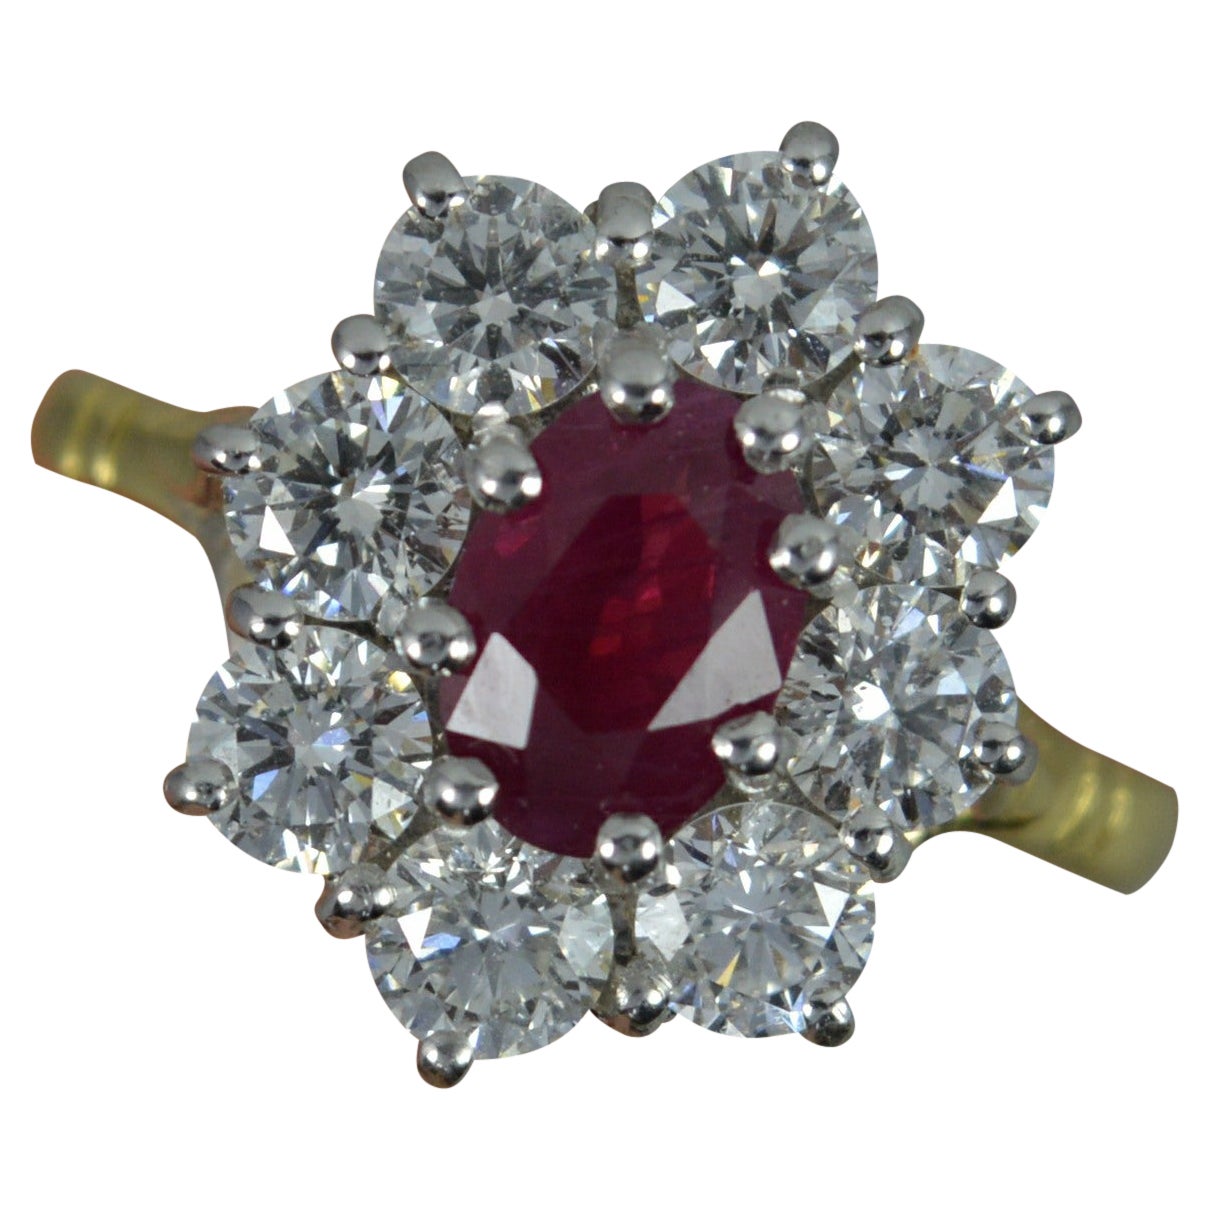 Stunning Classic Ruby and Vs 1.6ct Diamond 18ct Gold Cluster Ring